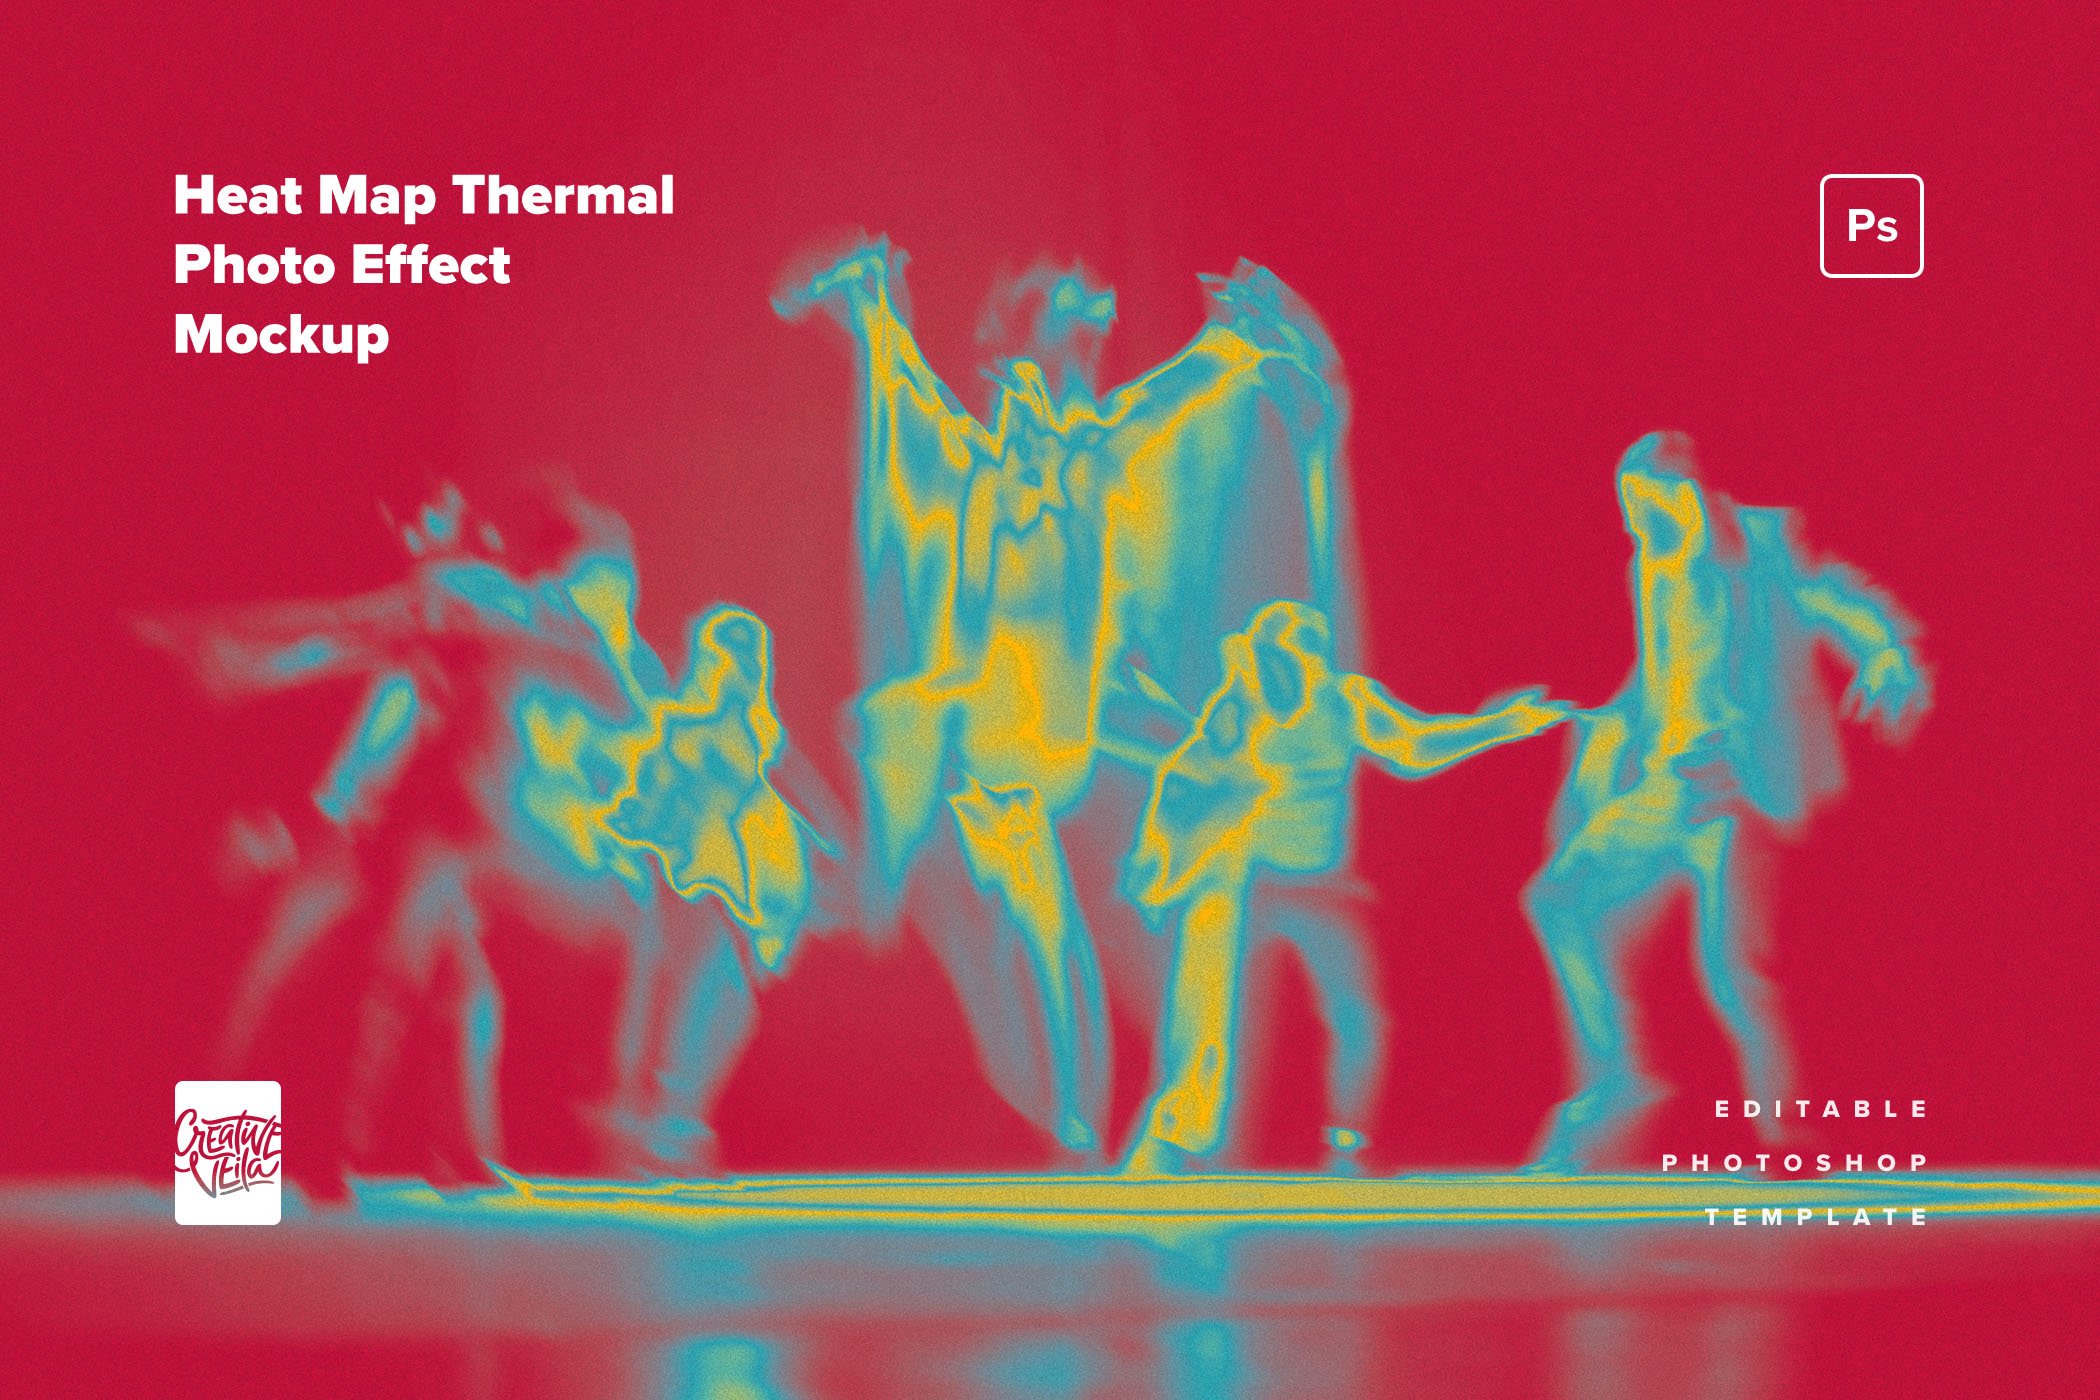 heat map thermal photo effect by creative veila 05 750